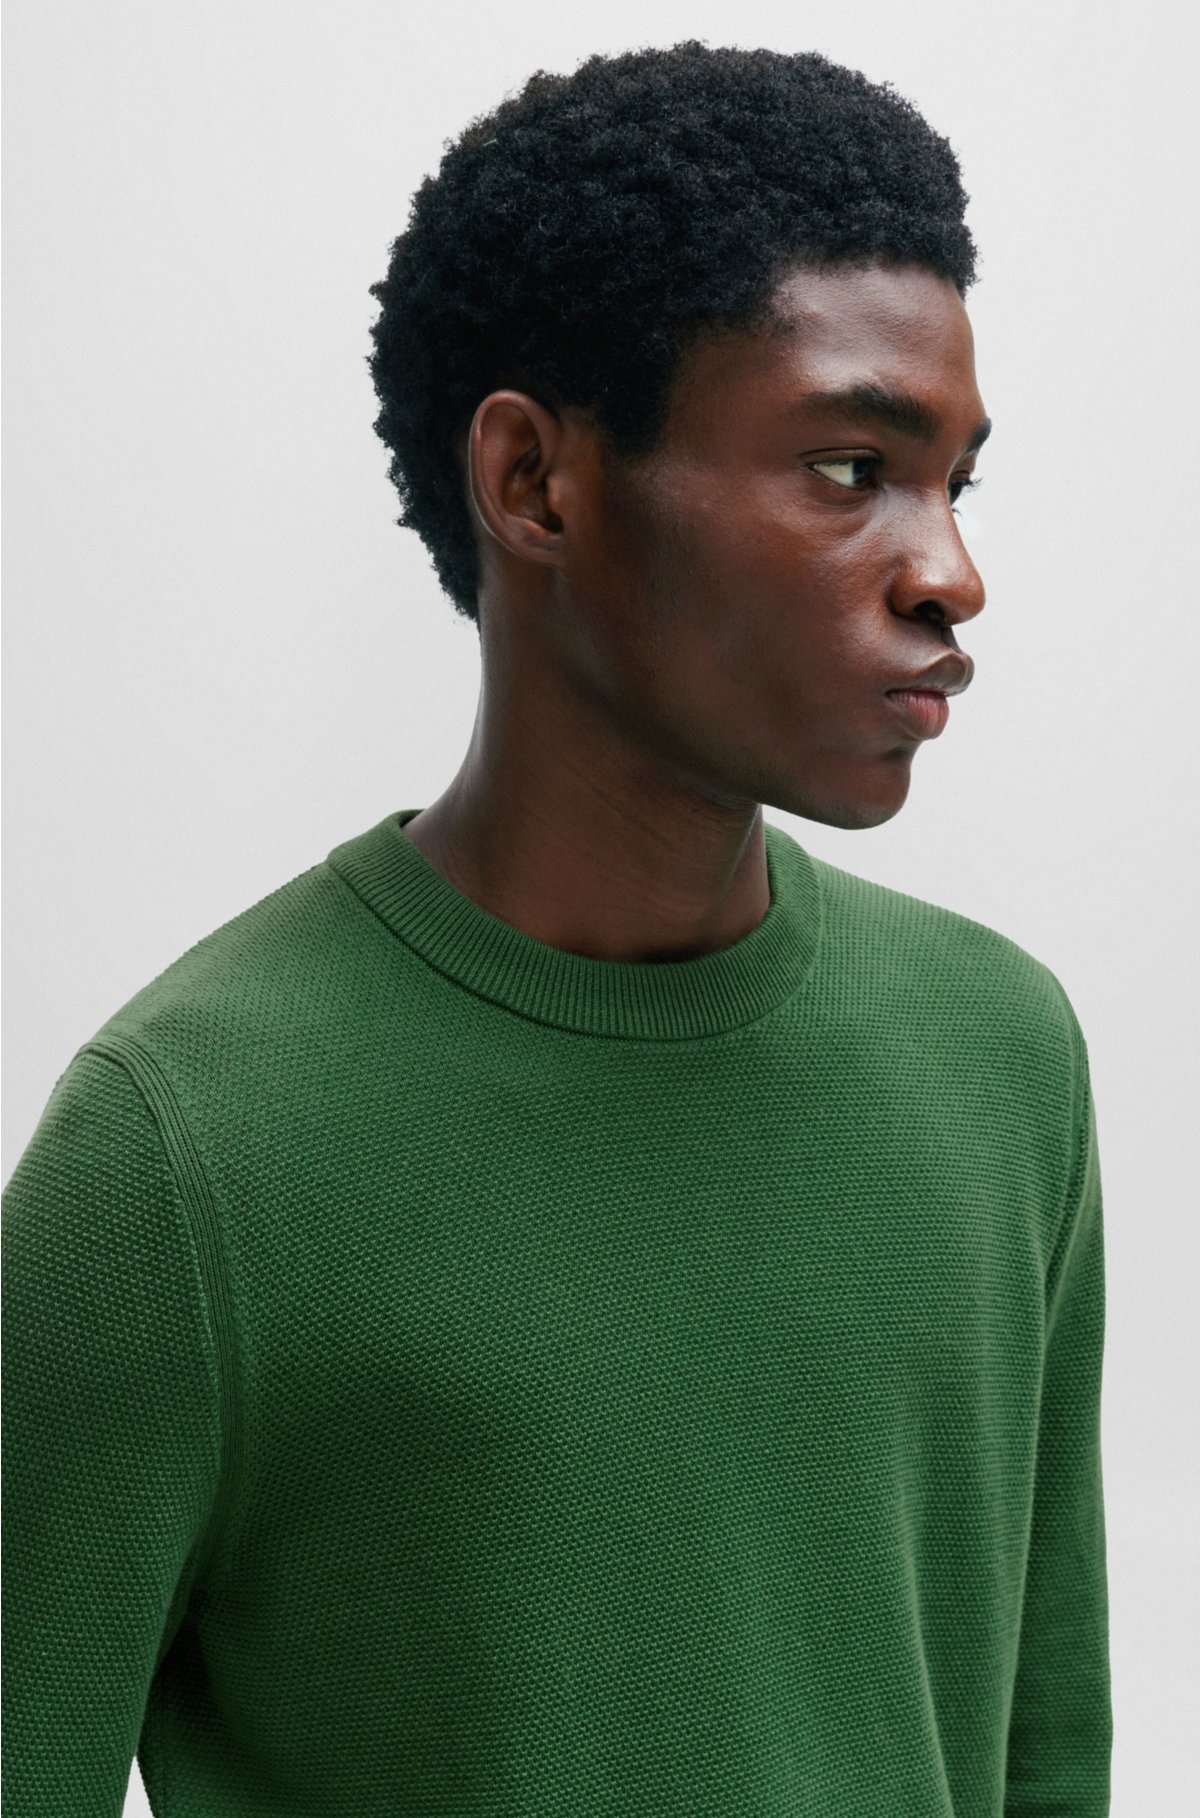 Micro-structured crew-neck sweater in cotton, Green